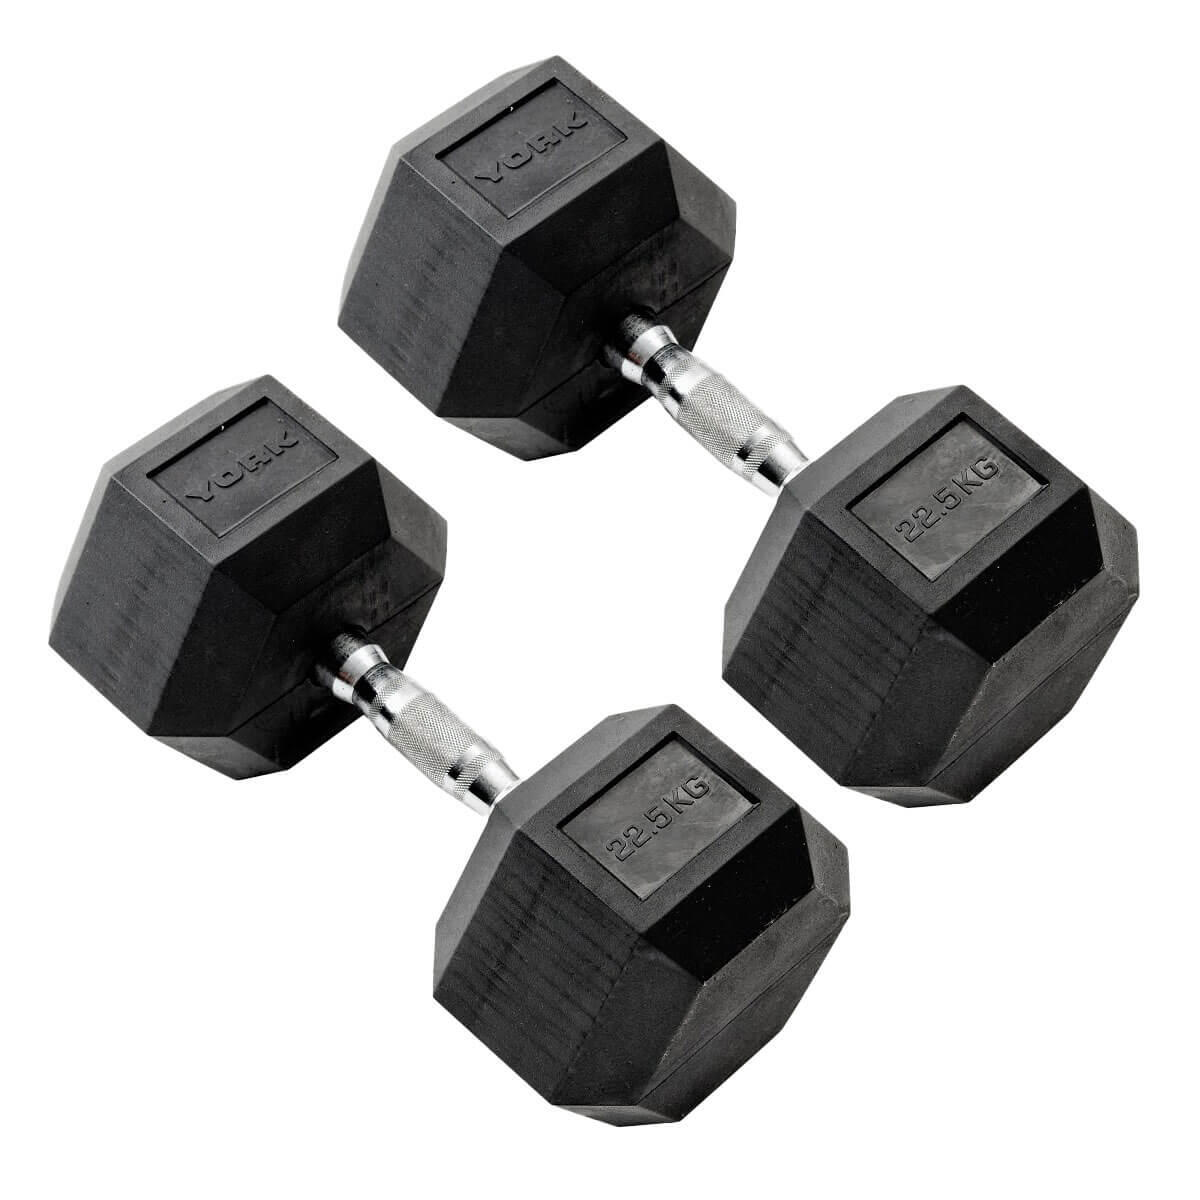 YORK BARBELL York 22.5kg Commercial Rubber Hex Dumbbells Weights